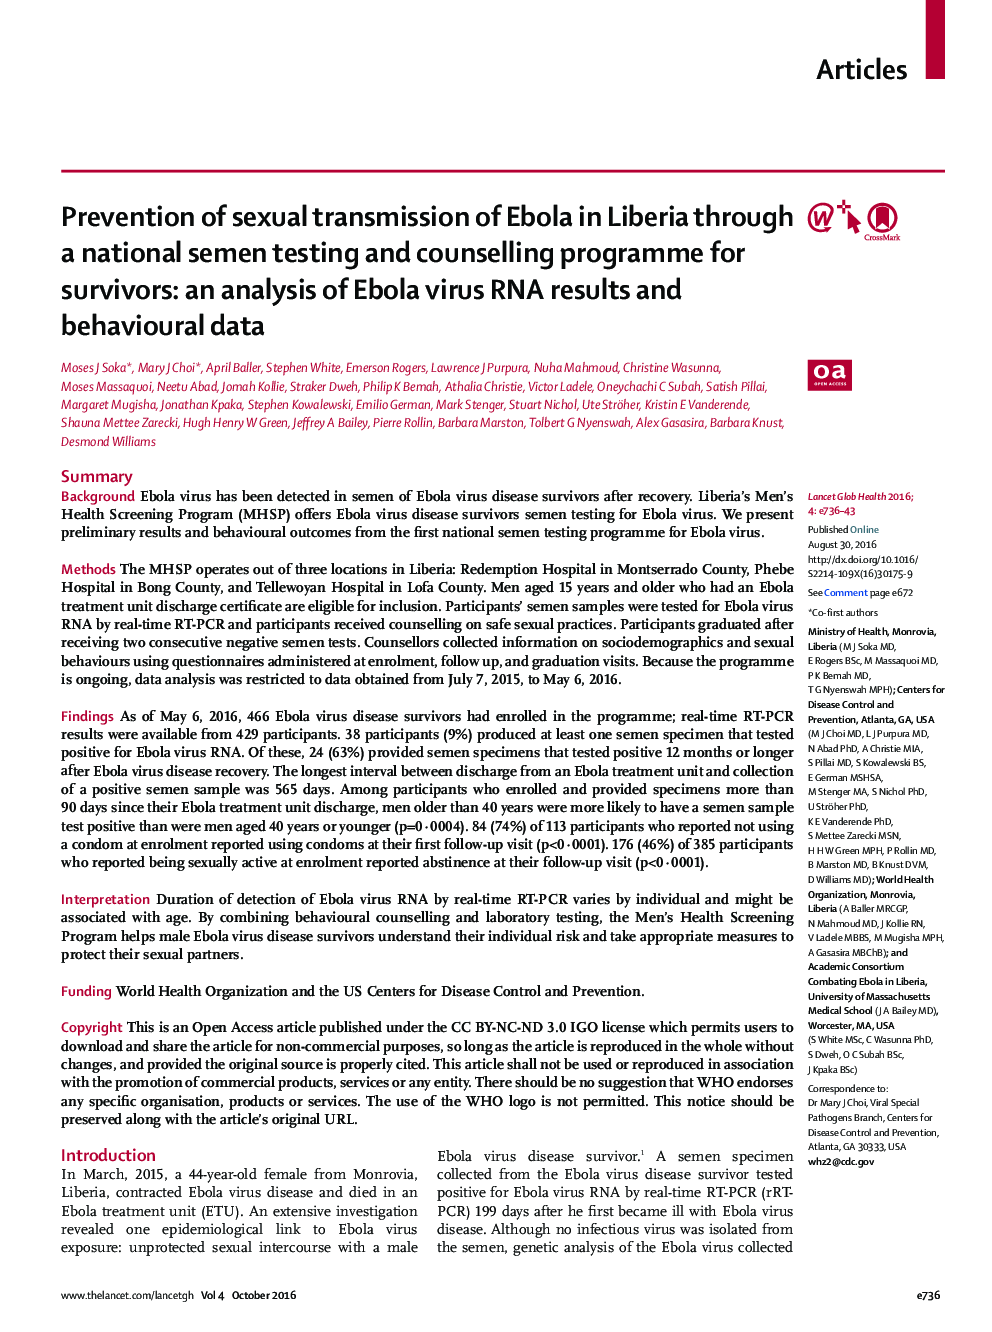 Prevention of sexual transmission of Ebola in Liberia through a national semen testing and counselling programme for survivors: an analysis of Ebola virus RNA results and behavioural data